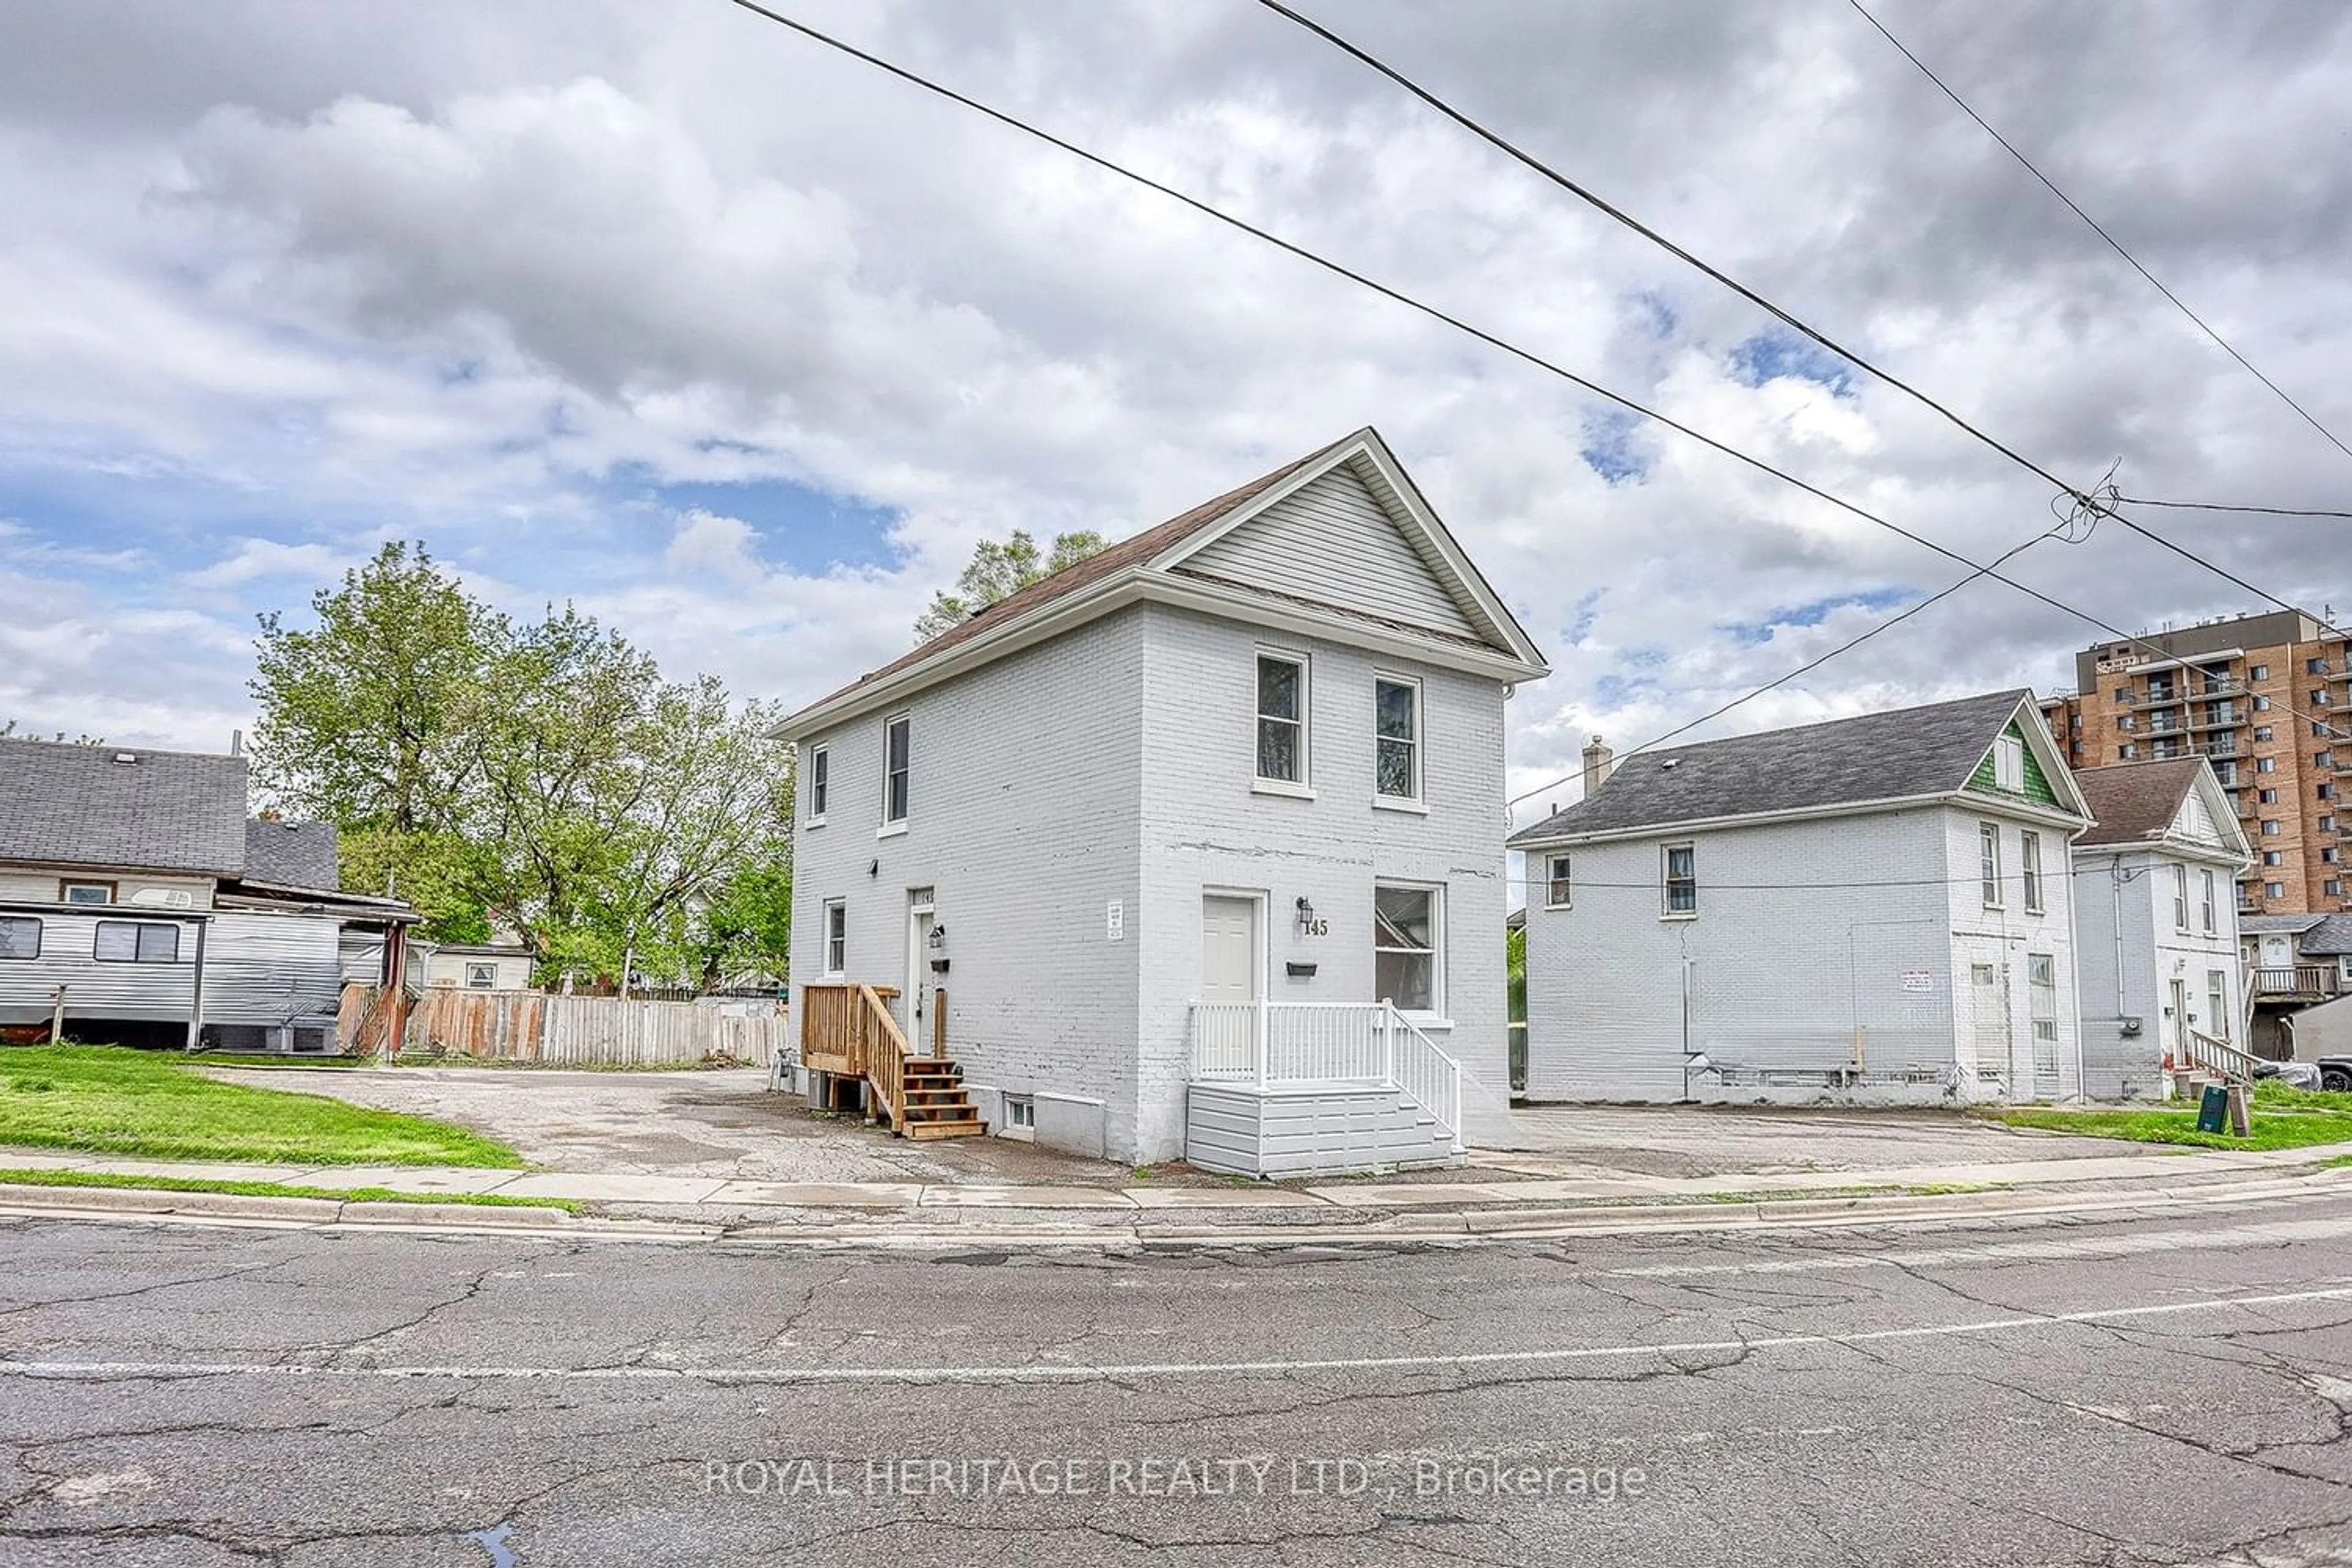 Street view for 145 Centre St, Oshawa Ontario L1G 4C2